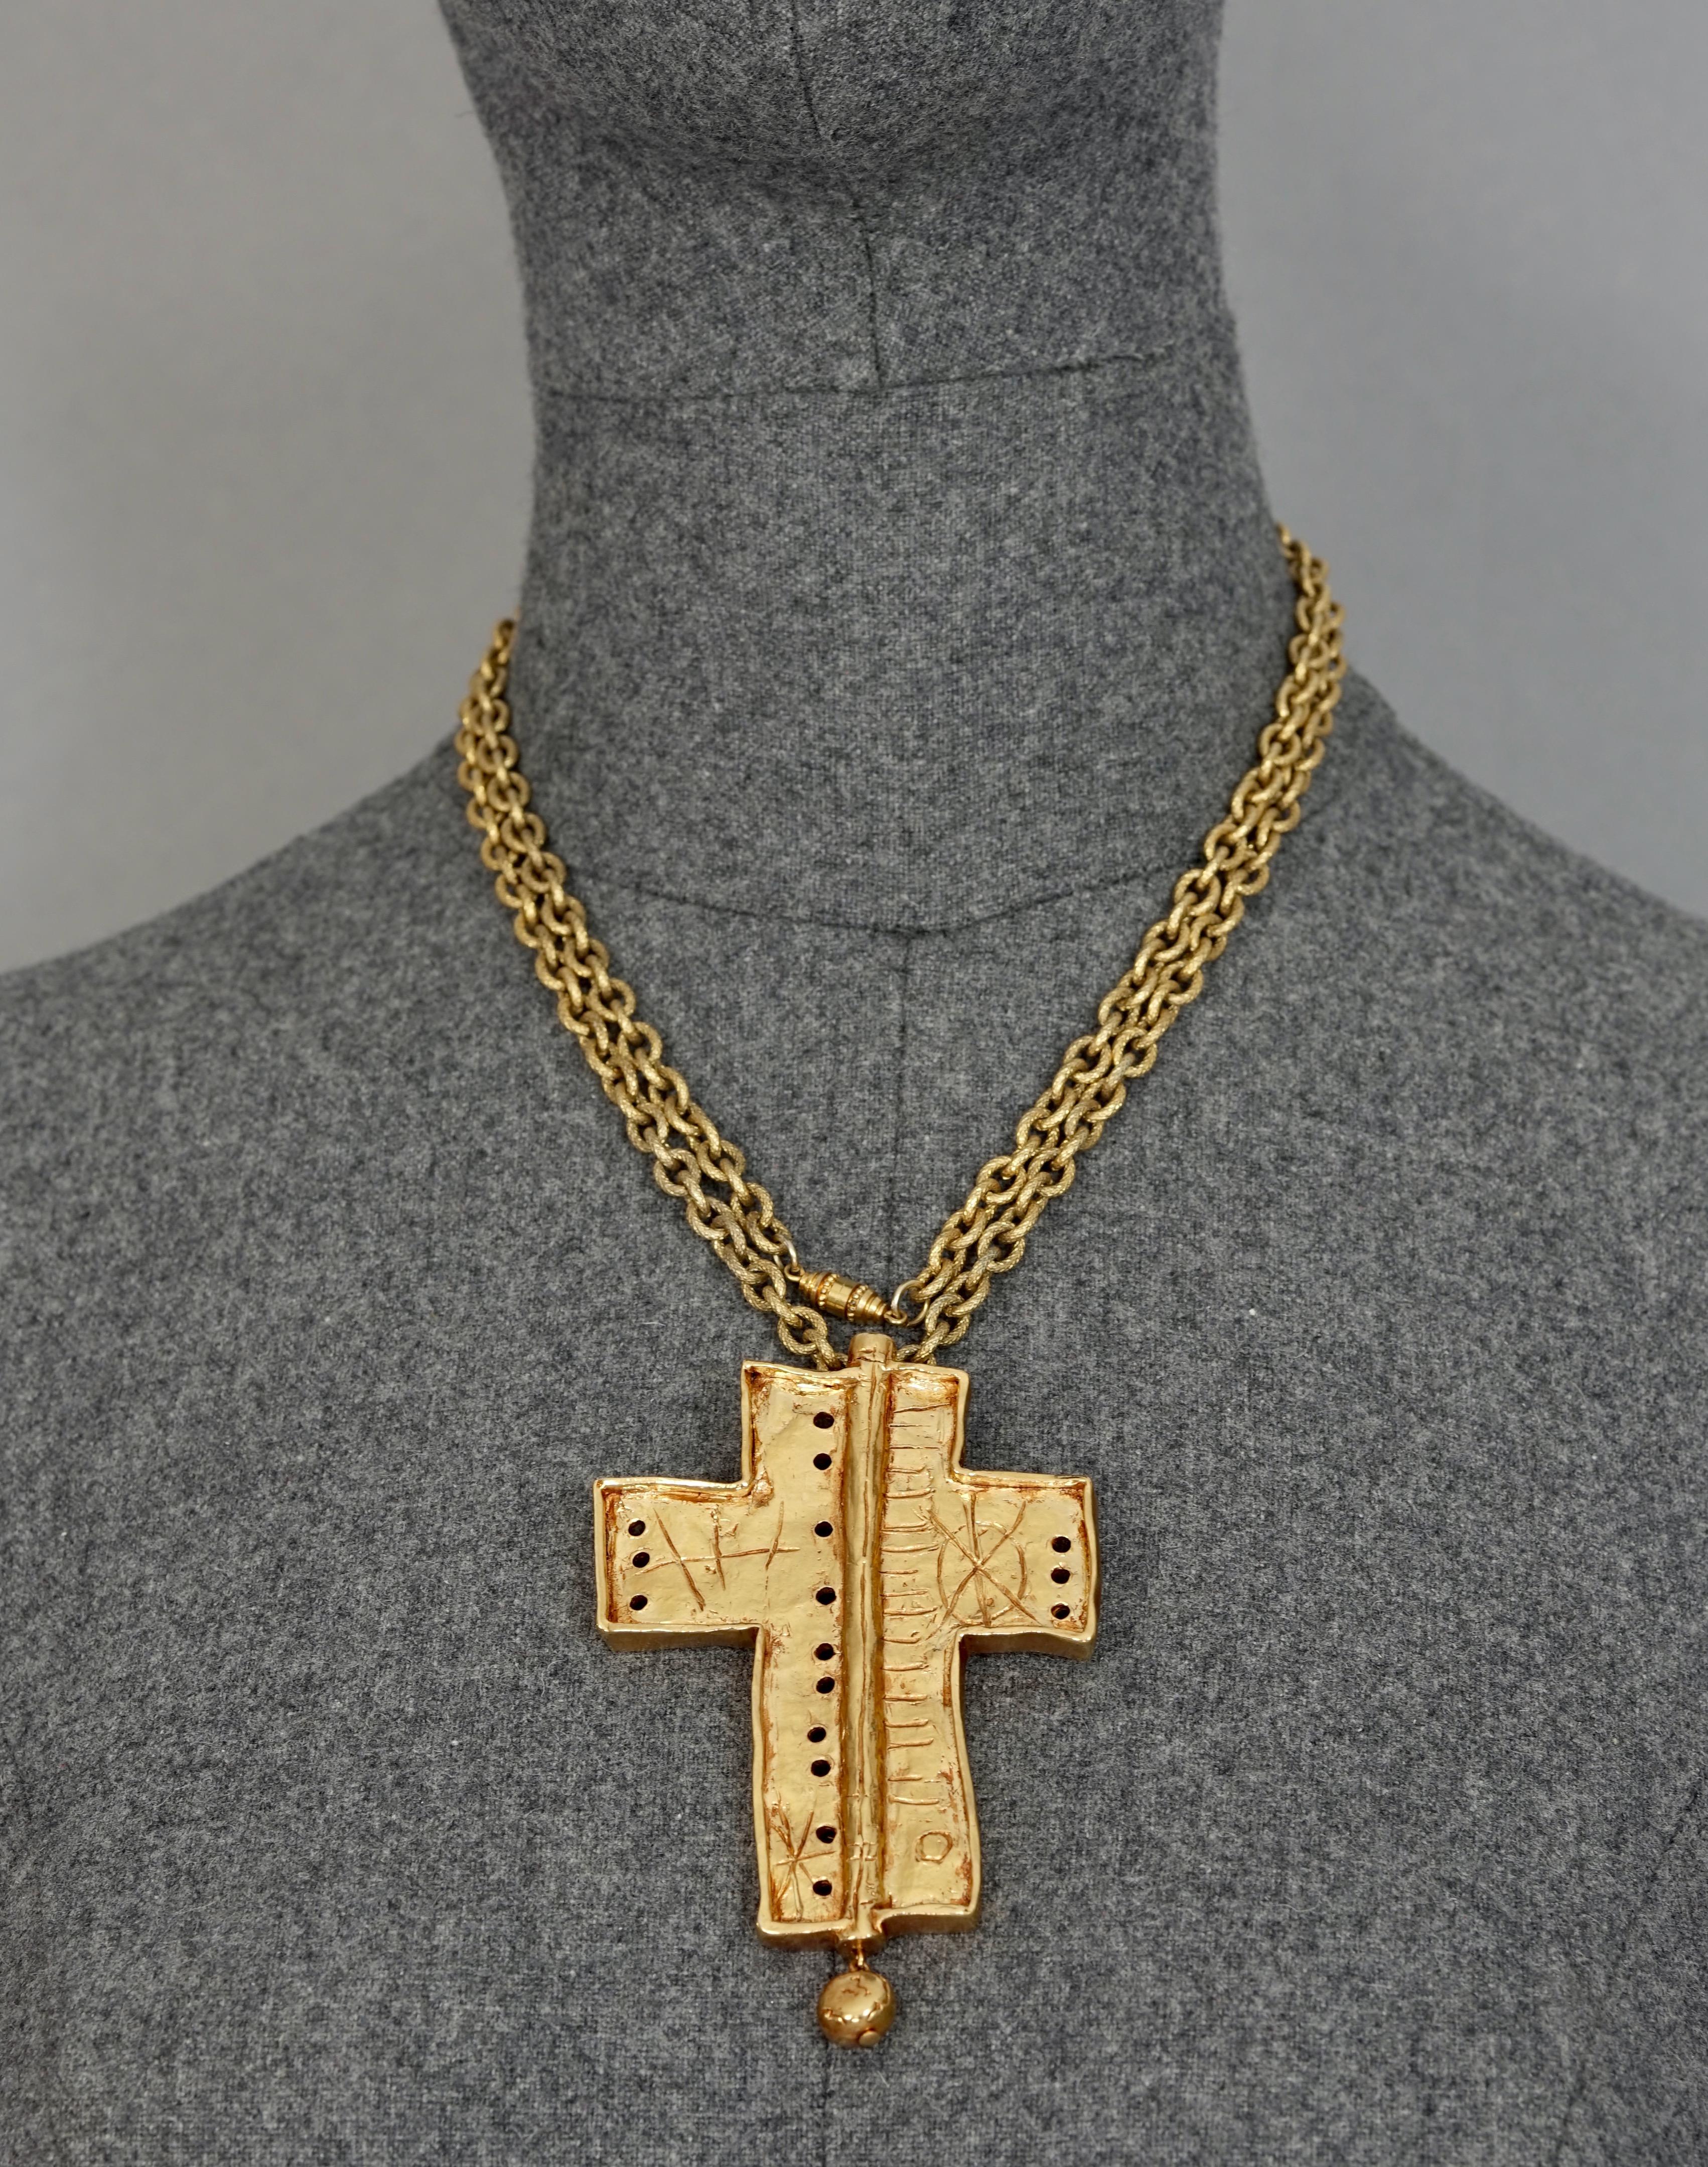 Vintage CHRISTIAN LACROIX Graffiti Cross Brooch Pendant Necklace

Measurements:
Height : 3.74 inches (9.5 cm)
Width: 2.87 inches (7.3 cm)

Features:
- 100% Authentic CHRISTIAN LACROIX.
- Chain necklace with textured cross pendant brooch with